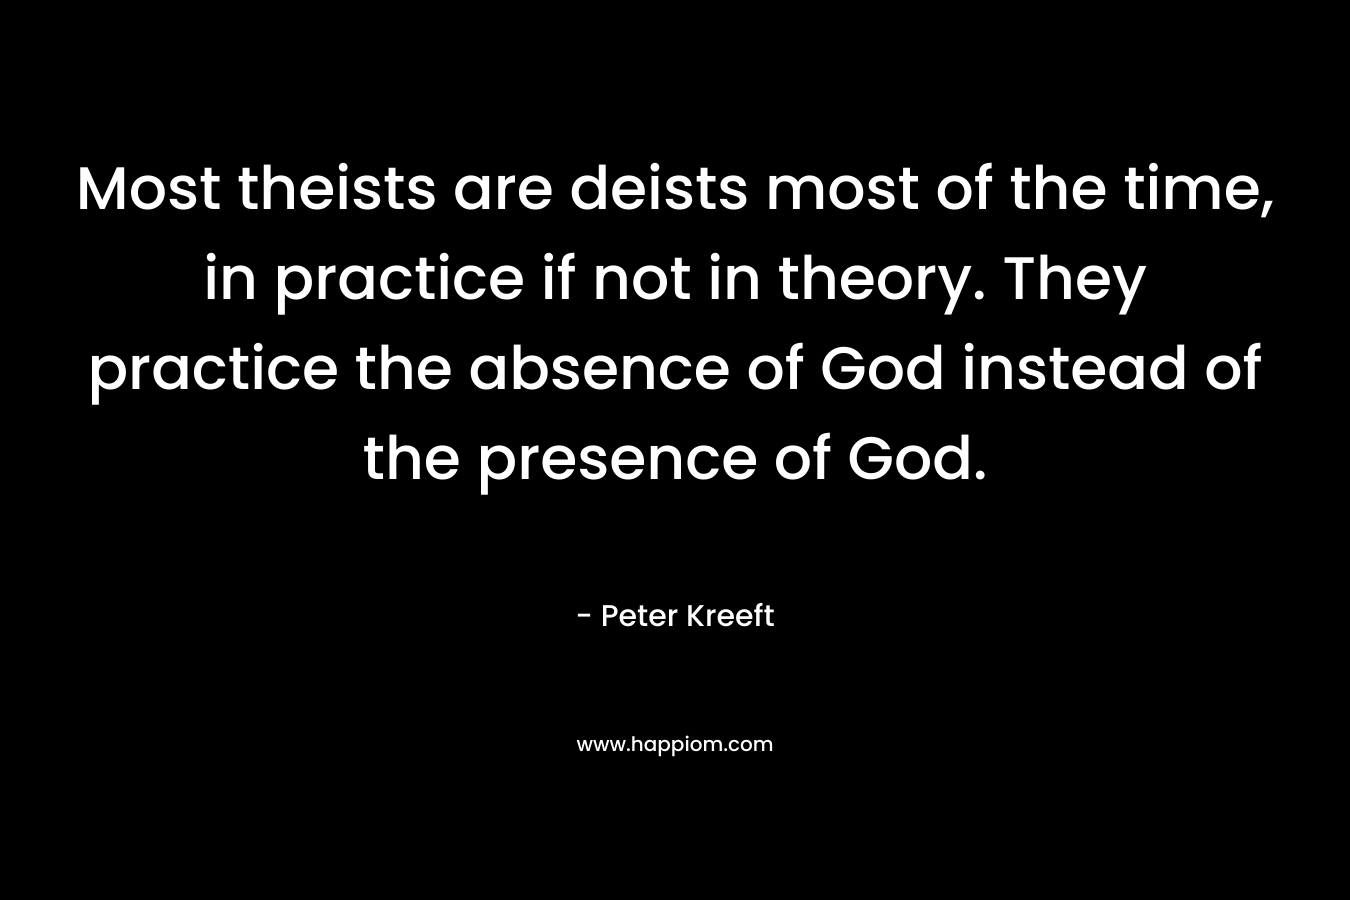 Most theists are deists most of the time, in practice if not in theory. They practice the absence of God instead of the presence of God. – Peter Kreeft